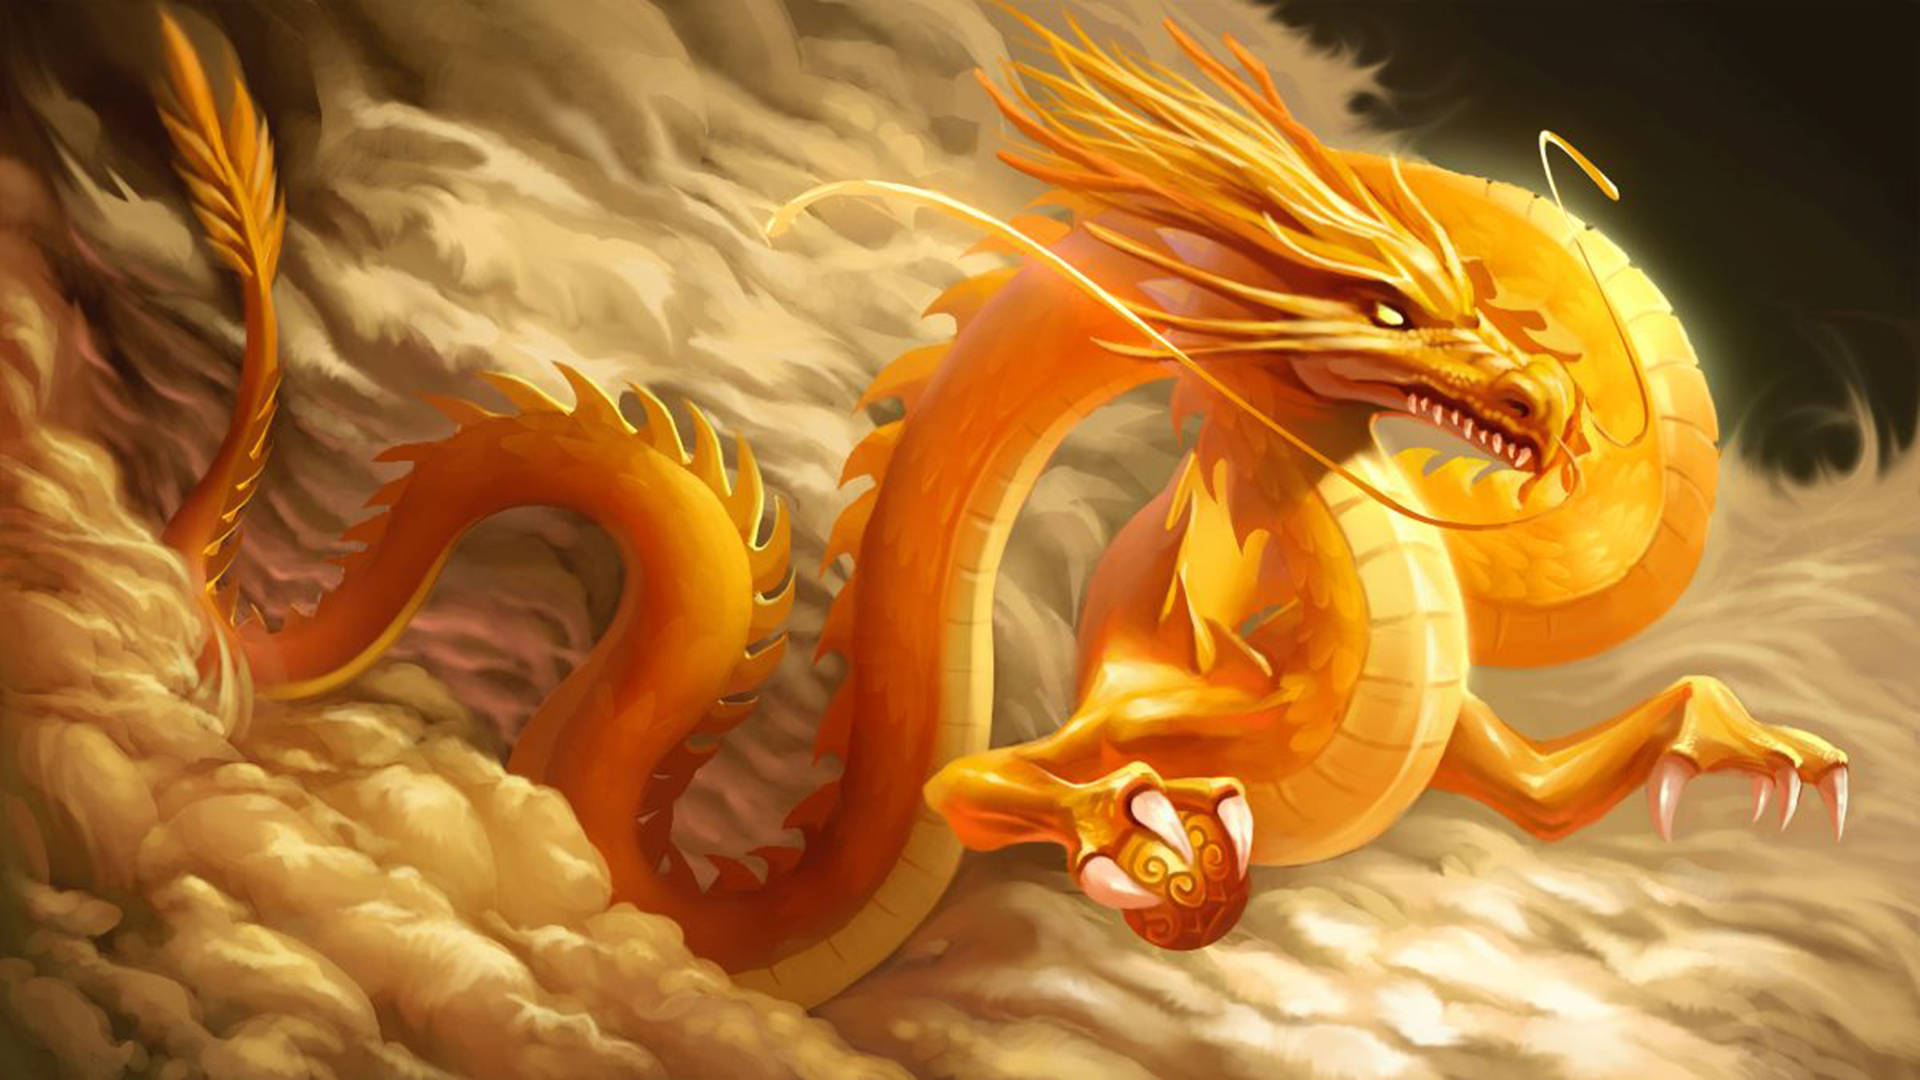 22400 Golden Dragon Stock Photos Pictures  RoyaltyFree Images  iStock   Chinese golden dragon